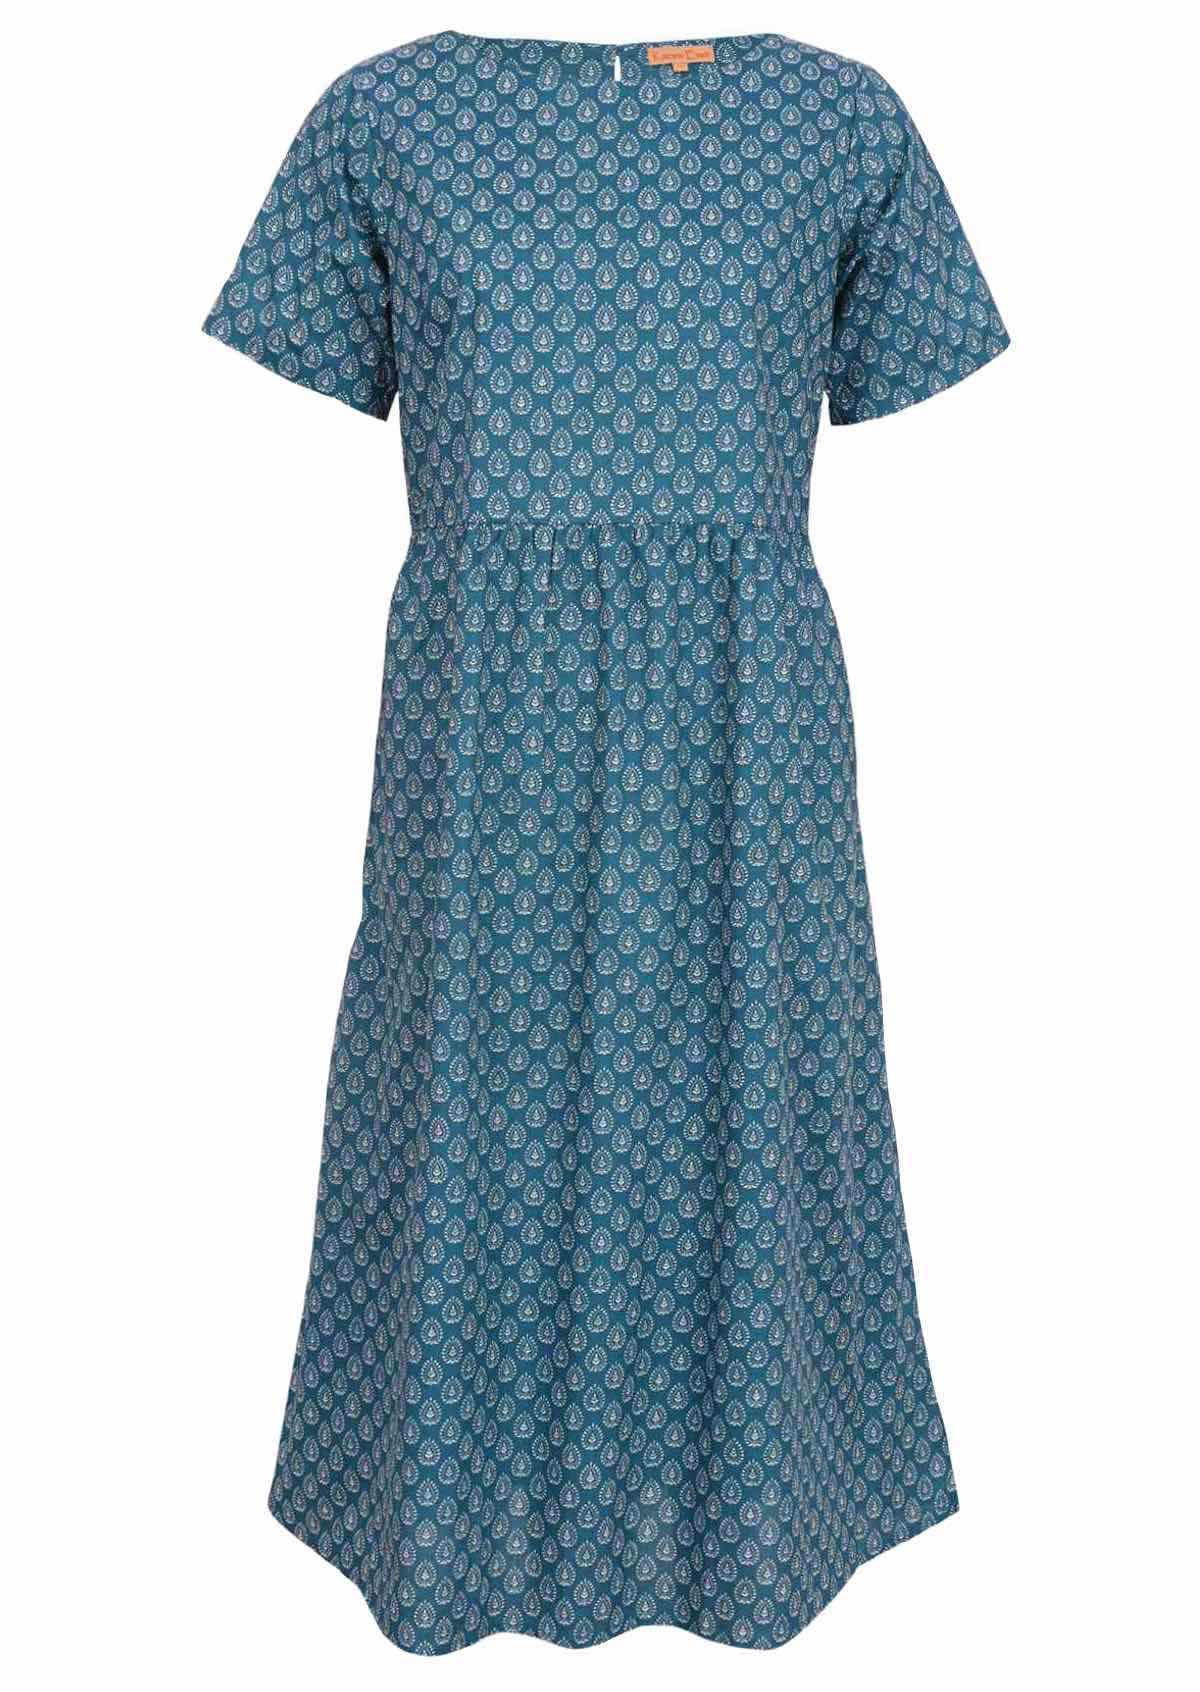 Midi length cotton dress with wide round neckline snd T-shirt sleeves